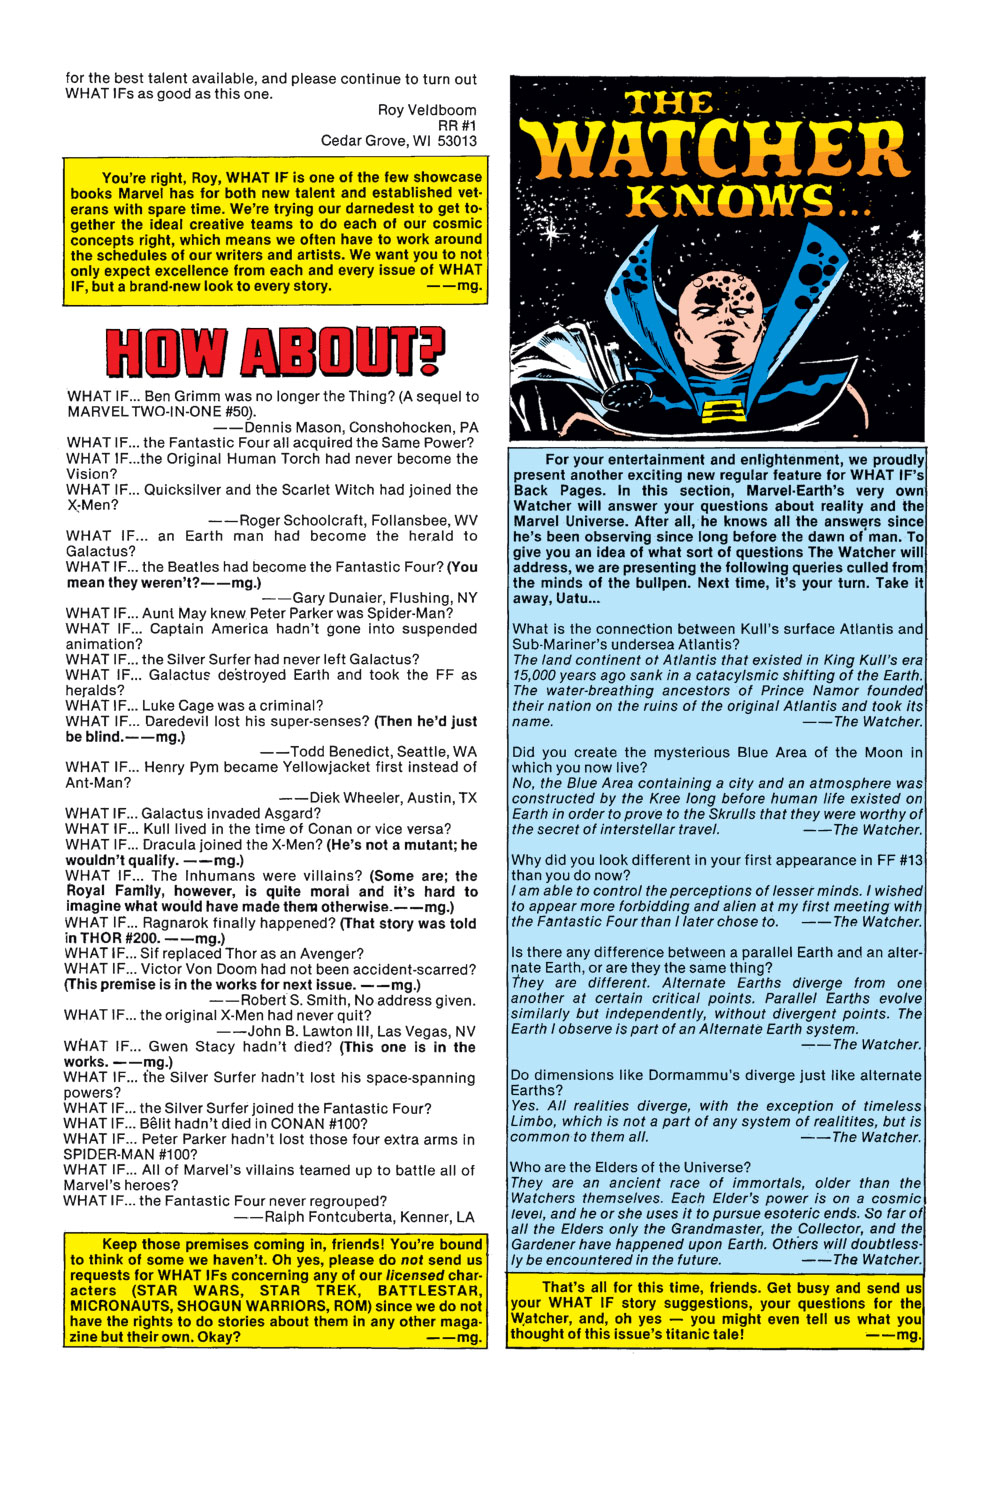 What If? (1977) issue 21 - Invisible Girl of the Fantastic Four married the Sub-Mariner - Page 37